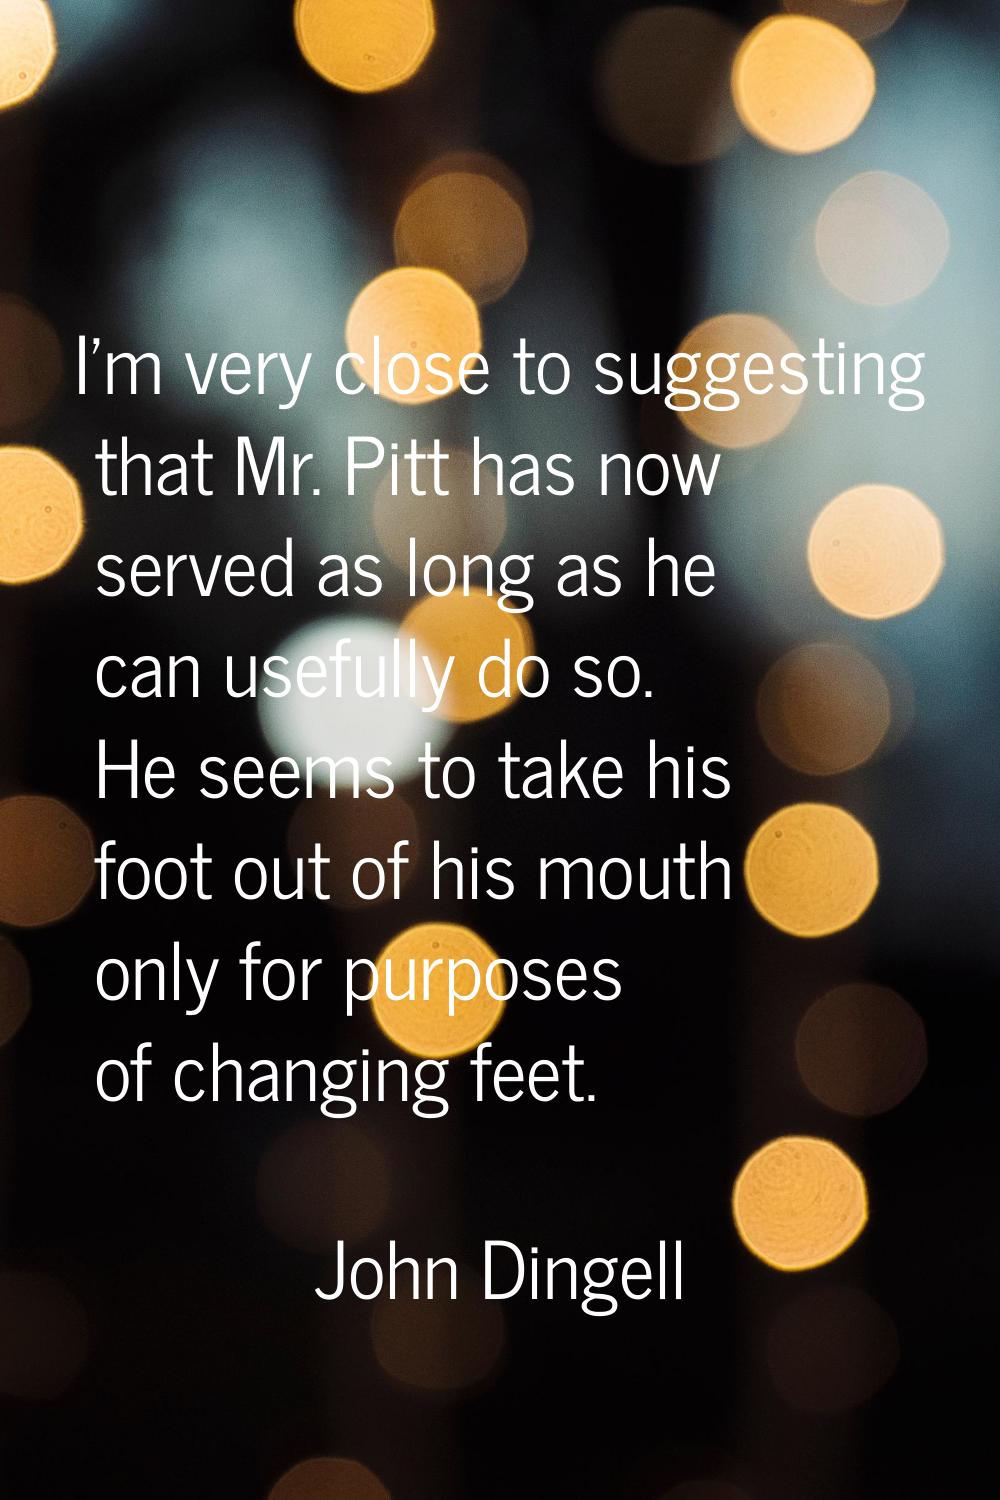 I'm very close to suggesting that Mr. Pitt has now served as long as he can usefully do so. He seem